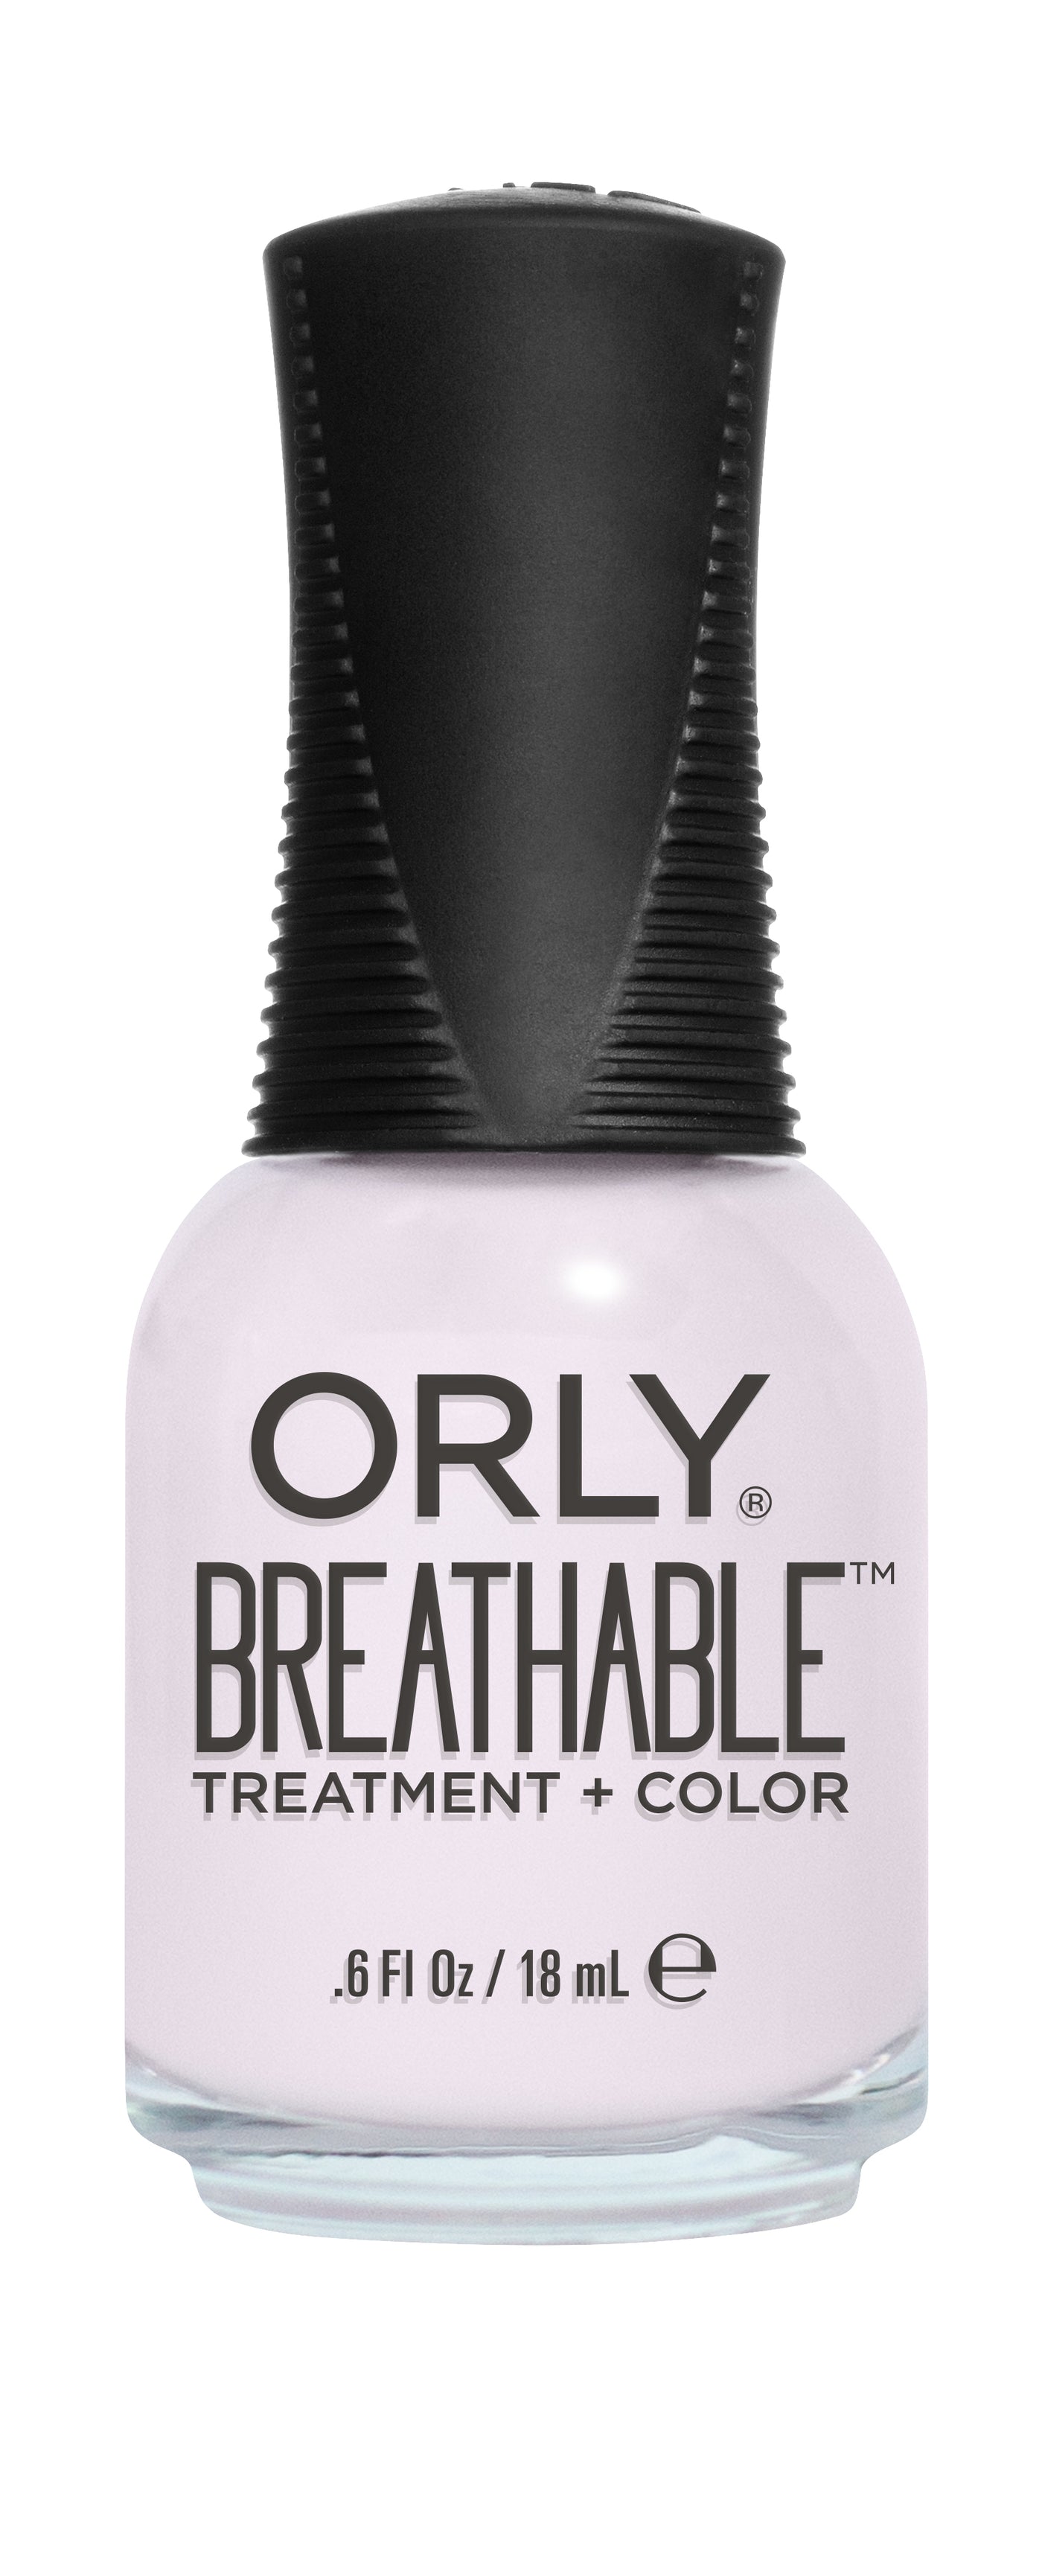 ORLY Breathable Nail Polish - Light As A Feather 20909